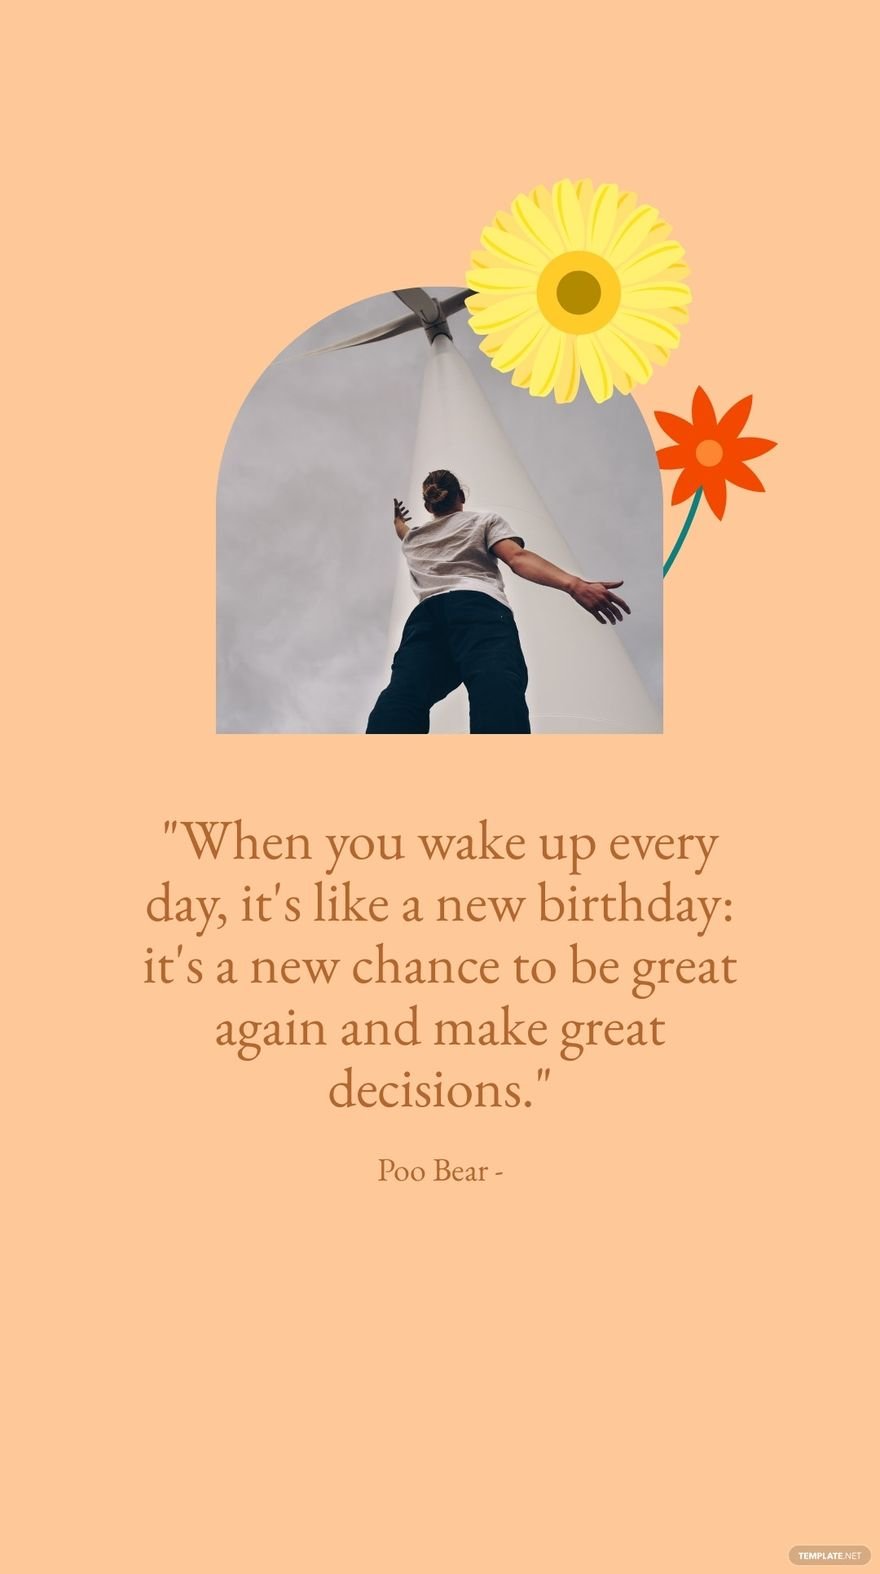 Poo Bear - When you wake up every day, it's like a new birthday: it's a new chance to be great again and make great decisions.